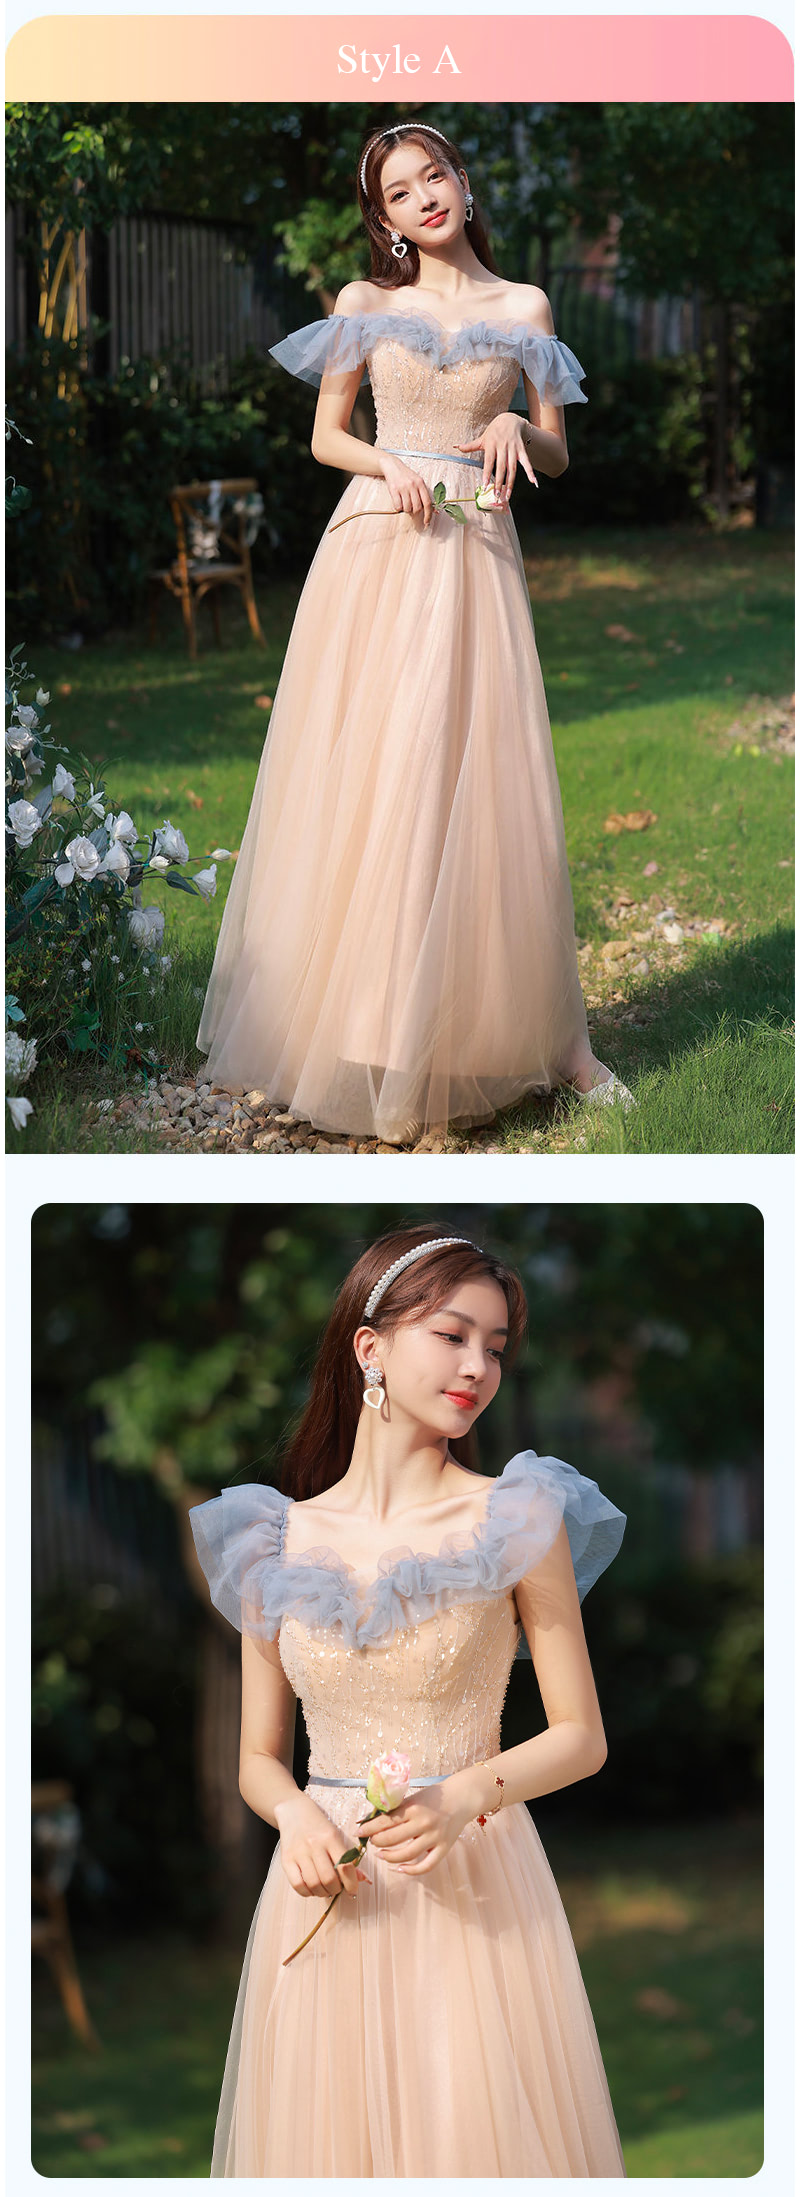 Fairy Bridesmaid Dress Wedding Guest Party Outfit Maxi Gown17